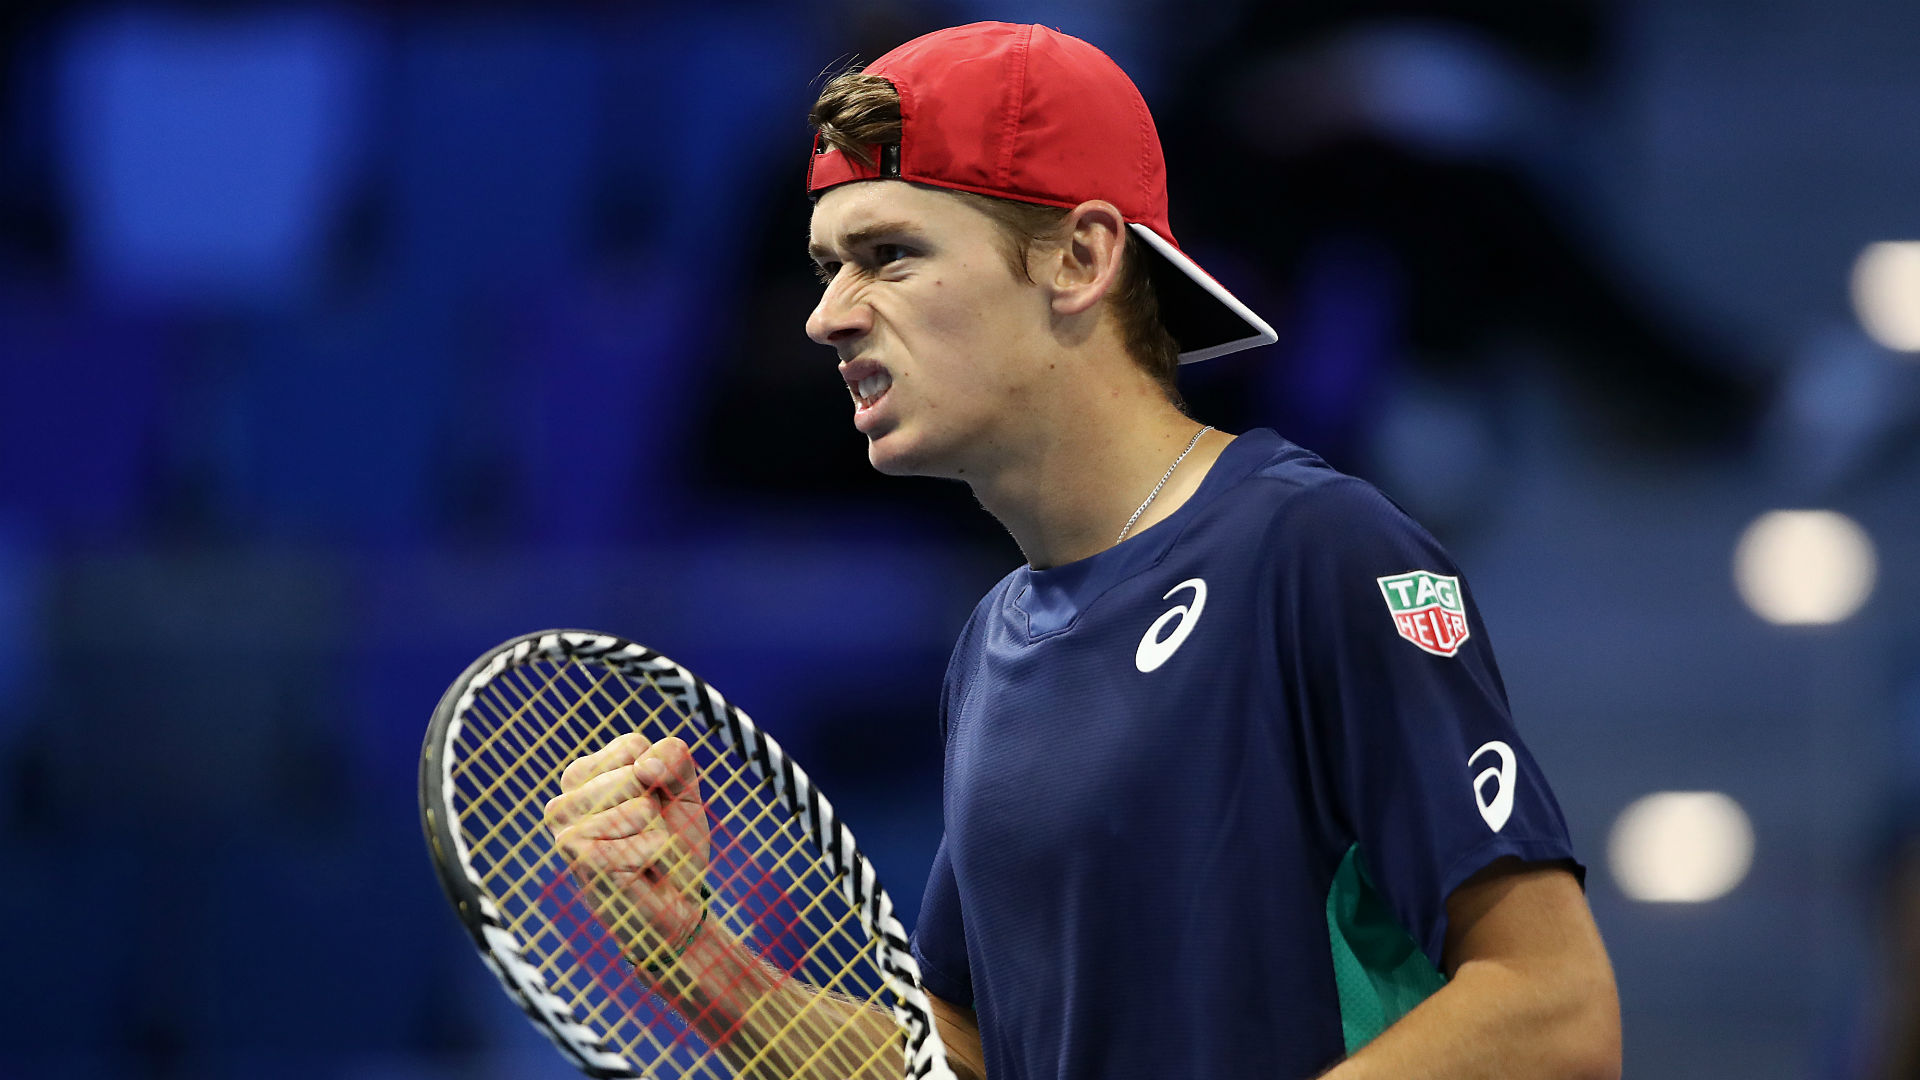 A runner-up in 2018, world number 18 Alex de Minaur started this year's Next Generation ATP Finals with a win.